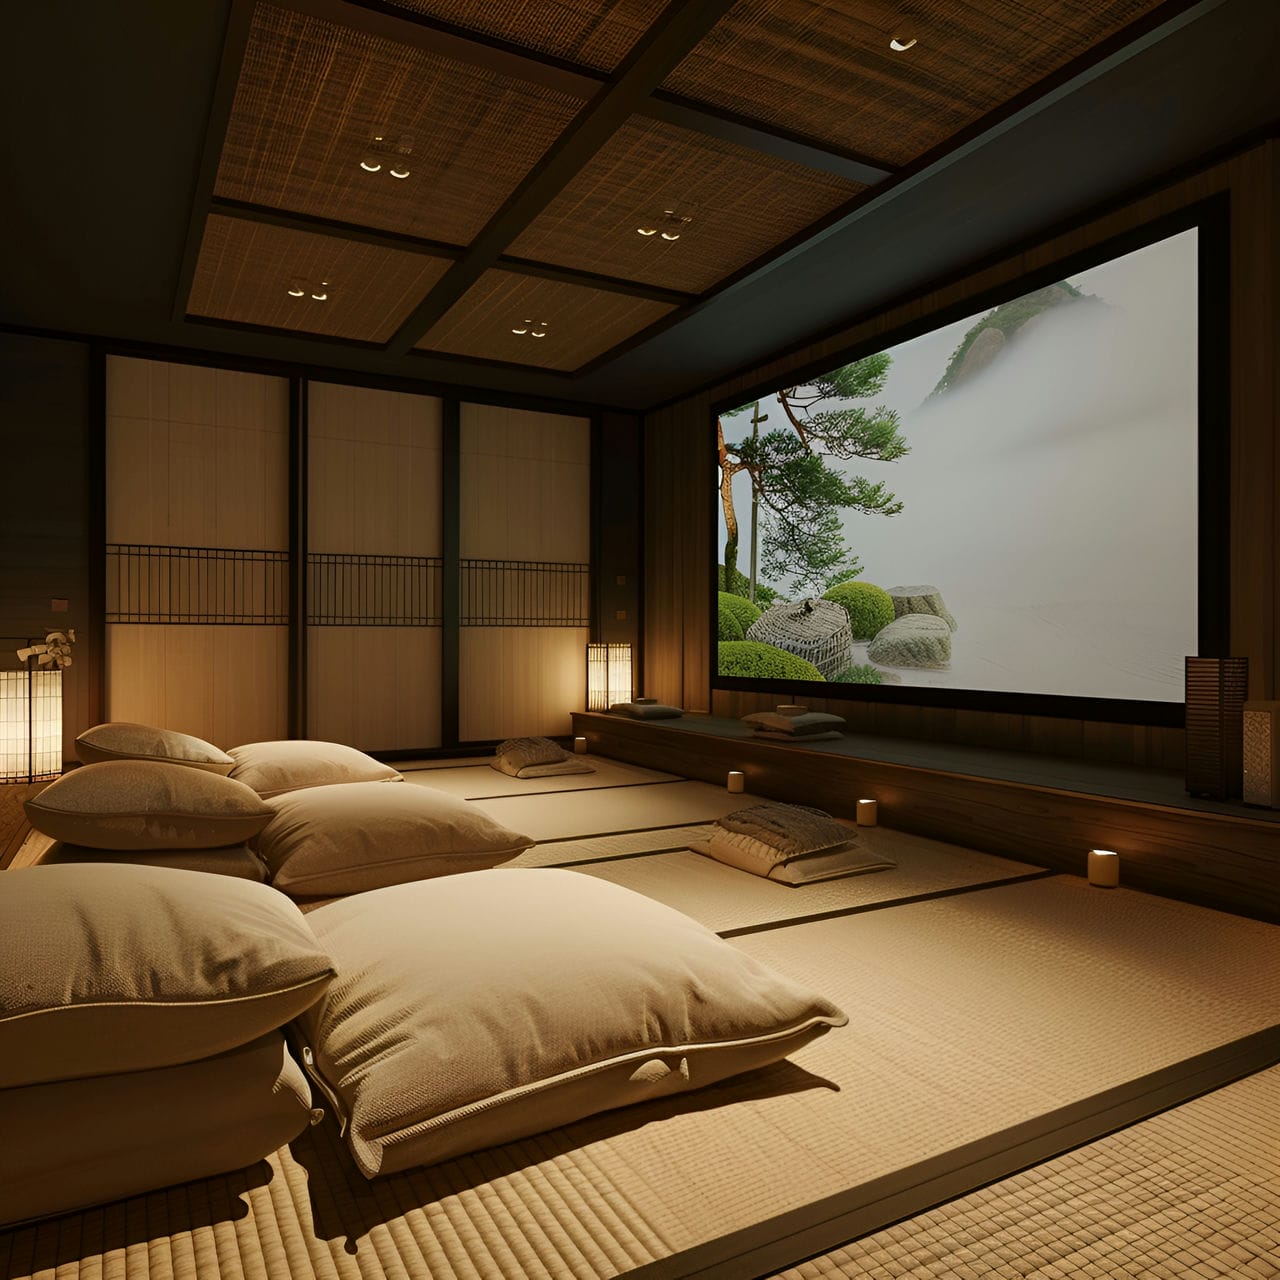 Home theater: size, functionality, uses, furniture and renovation